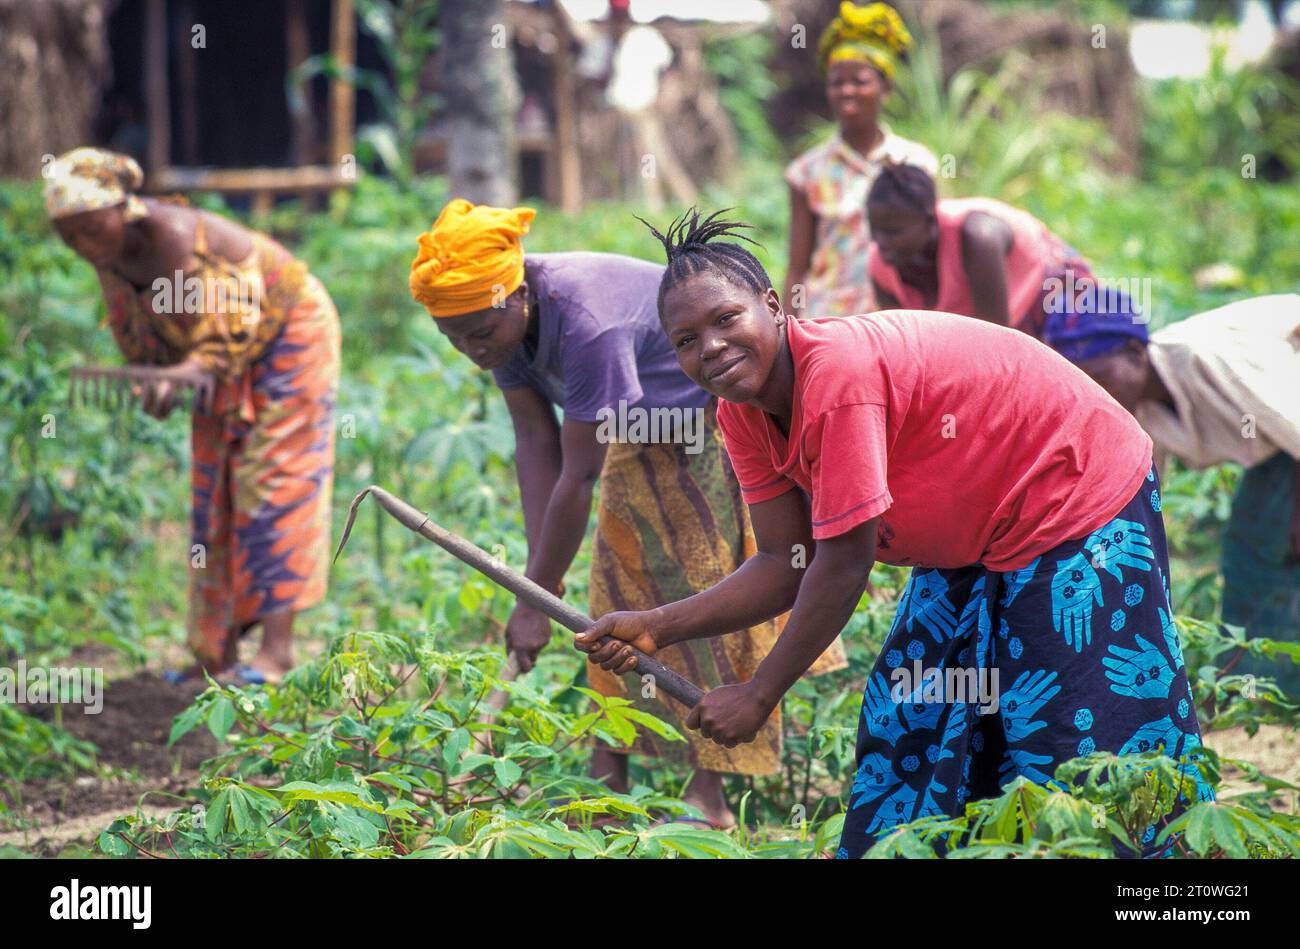 Liberia, Monrovia region; women are ploughing a field with cassave or maniok. Stock Photo